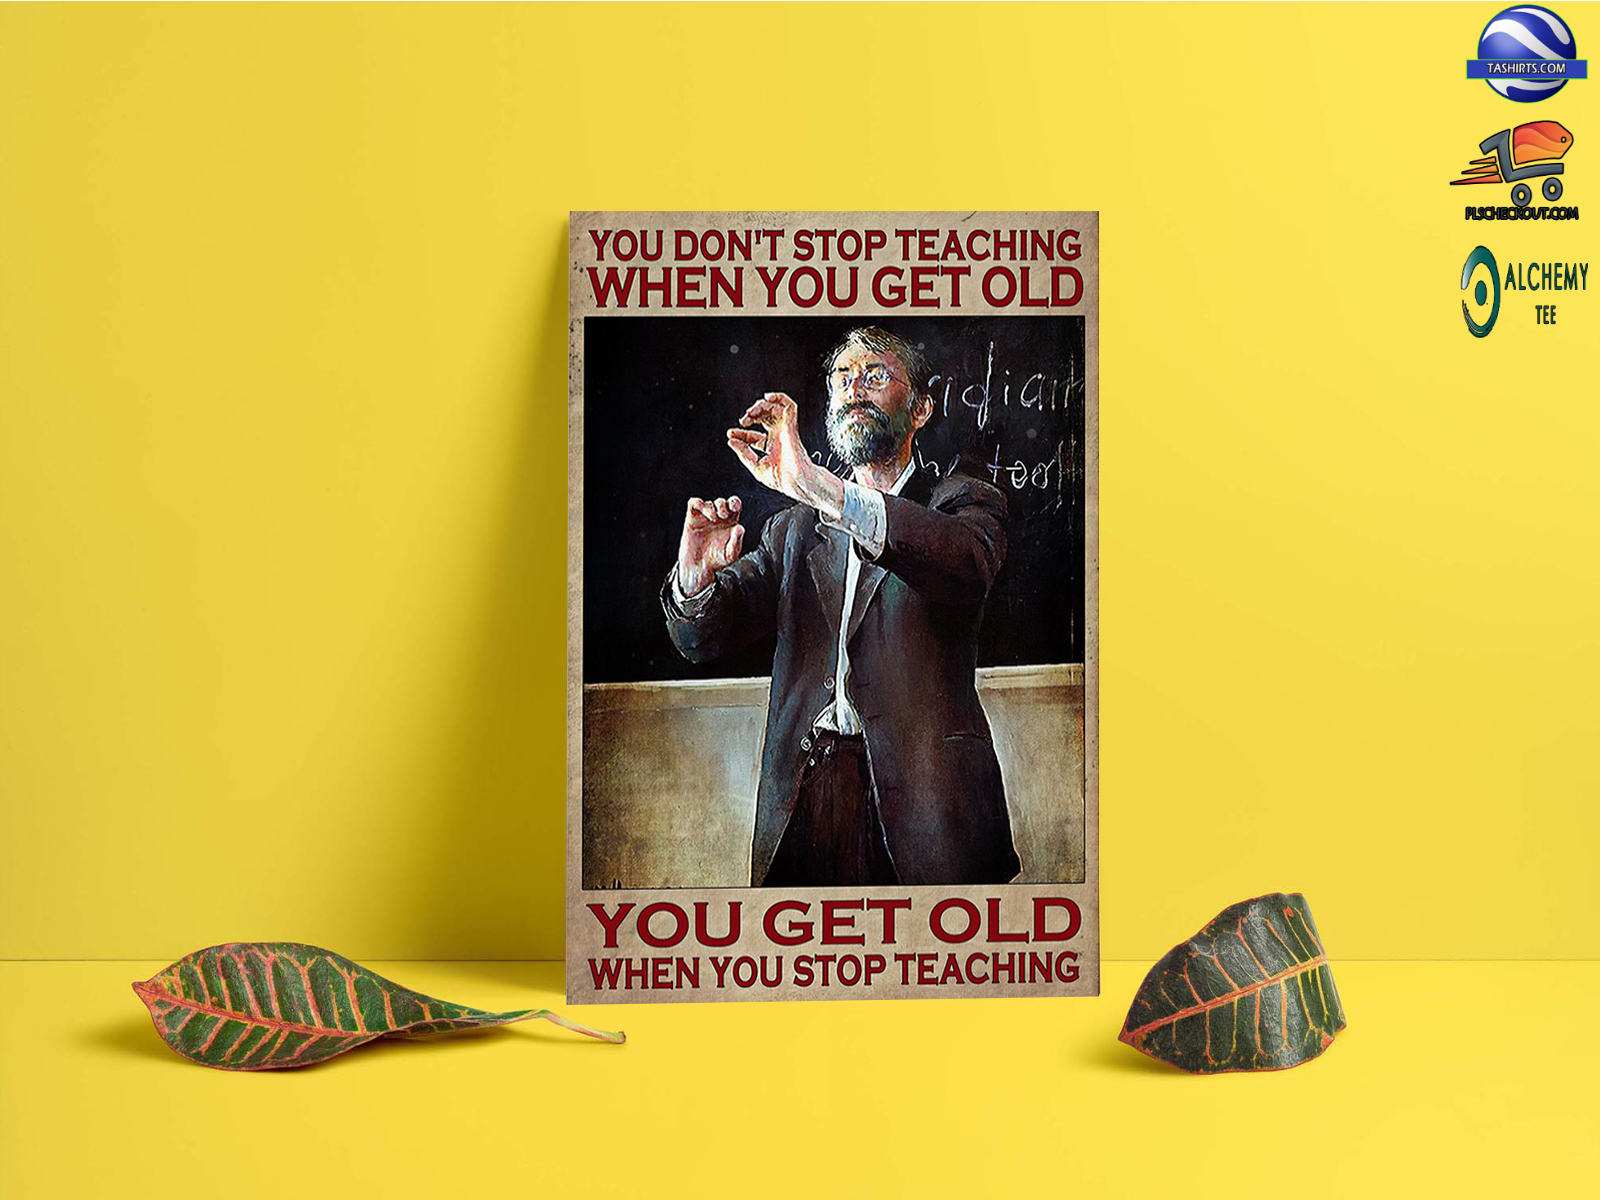 You don’t stop teaching when you get old you get old when you stop teaching poster